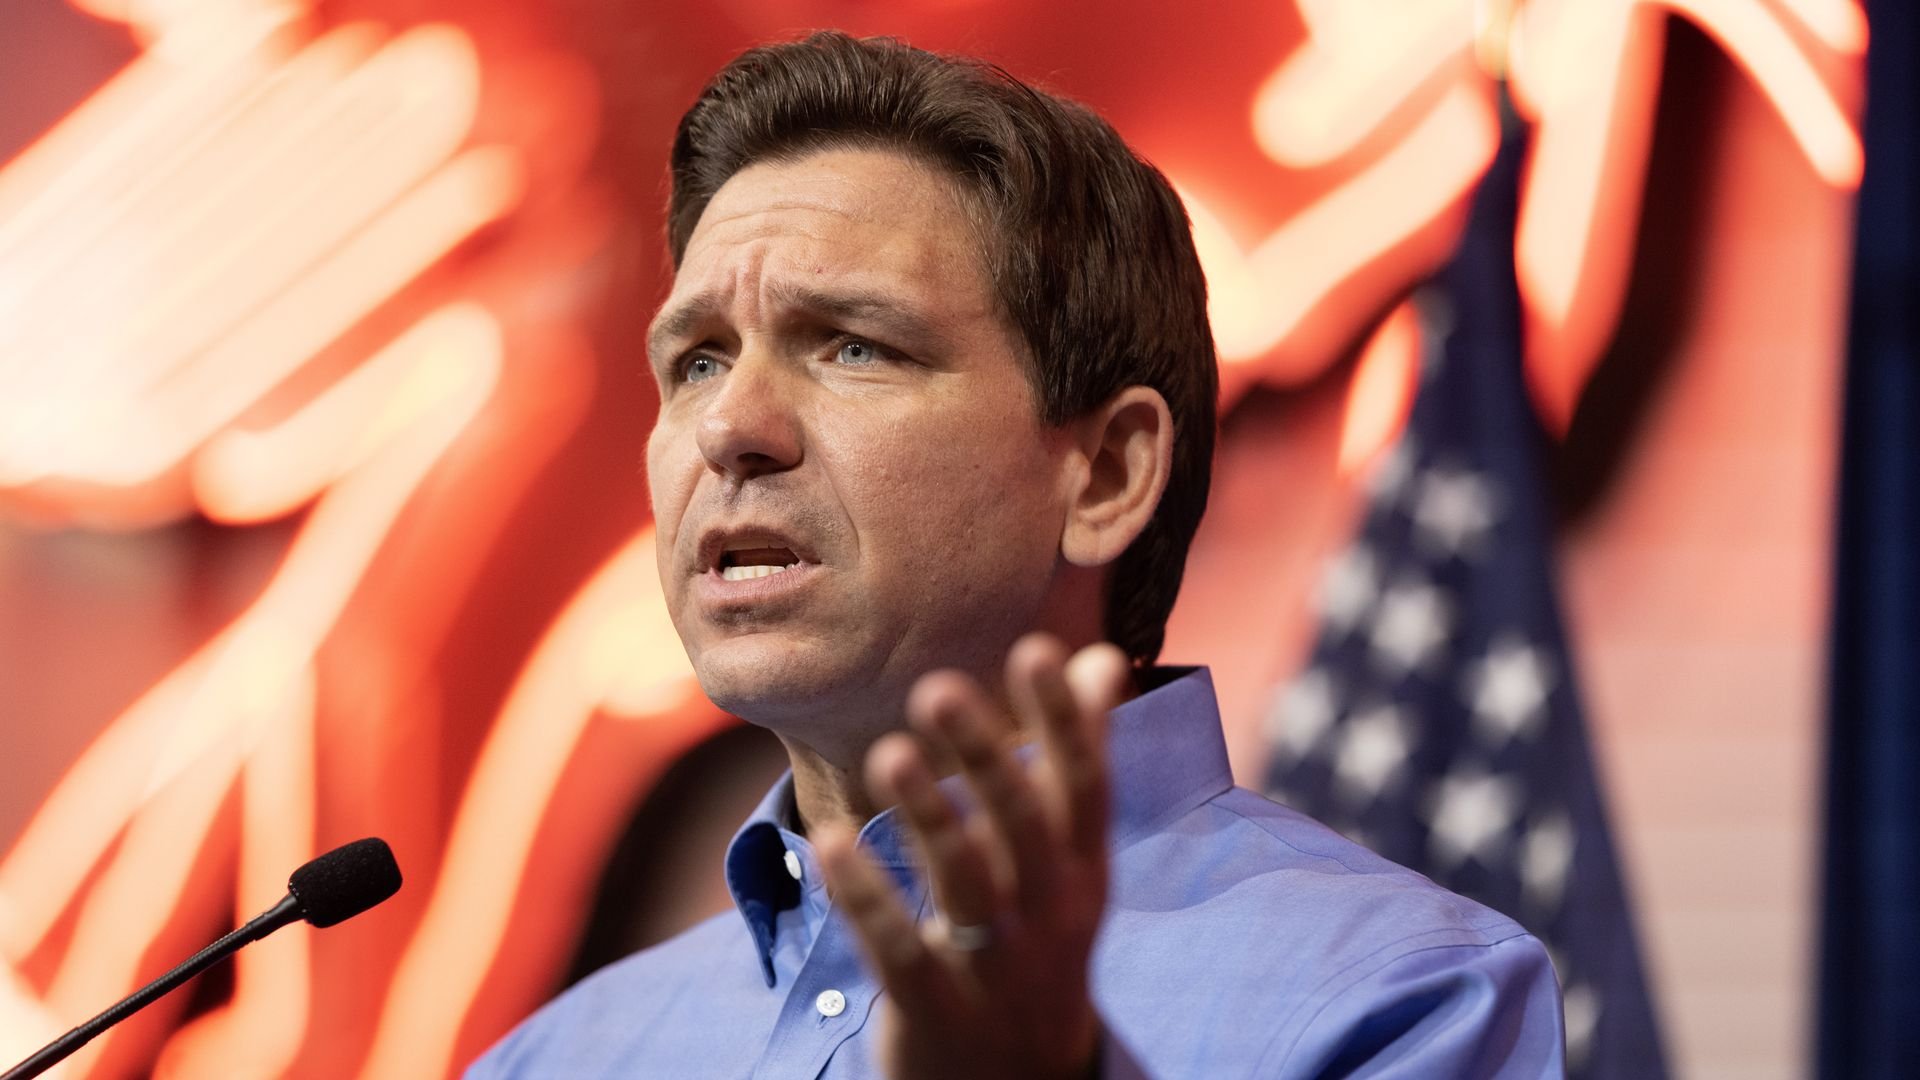 DeSantis hits Trump from the right on crime